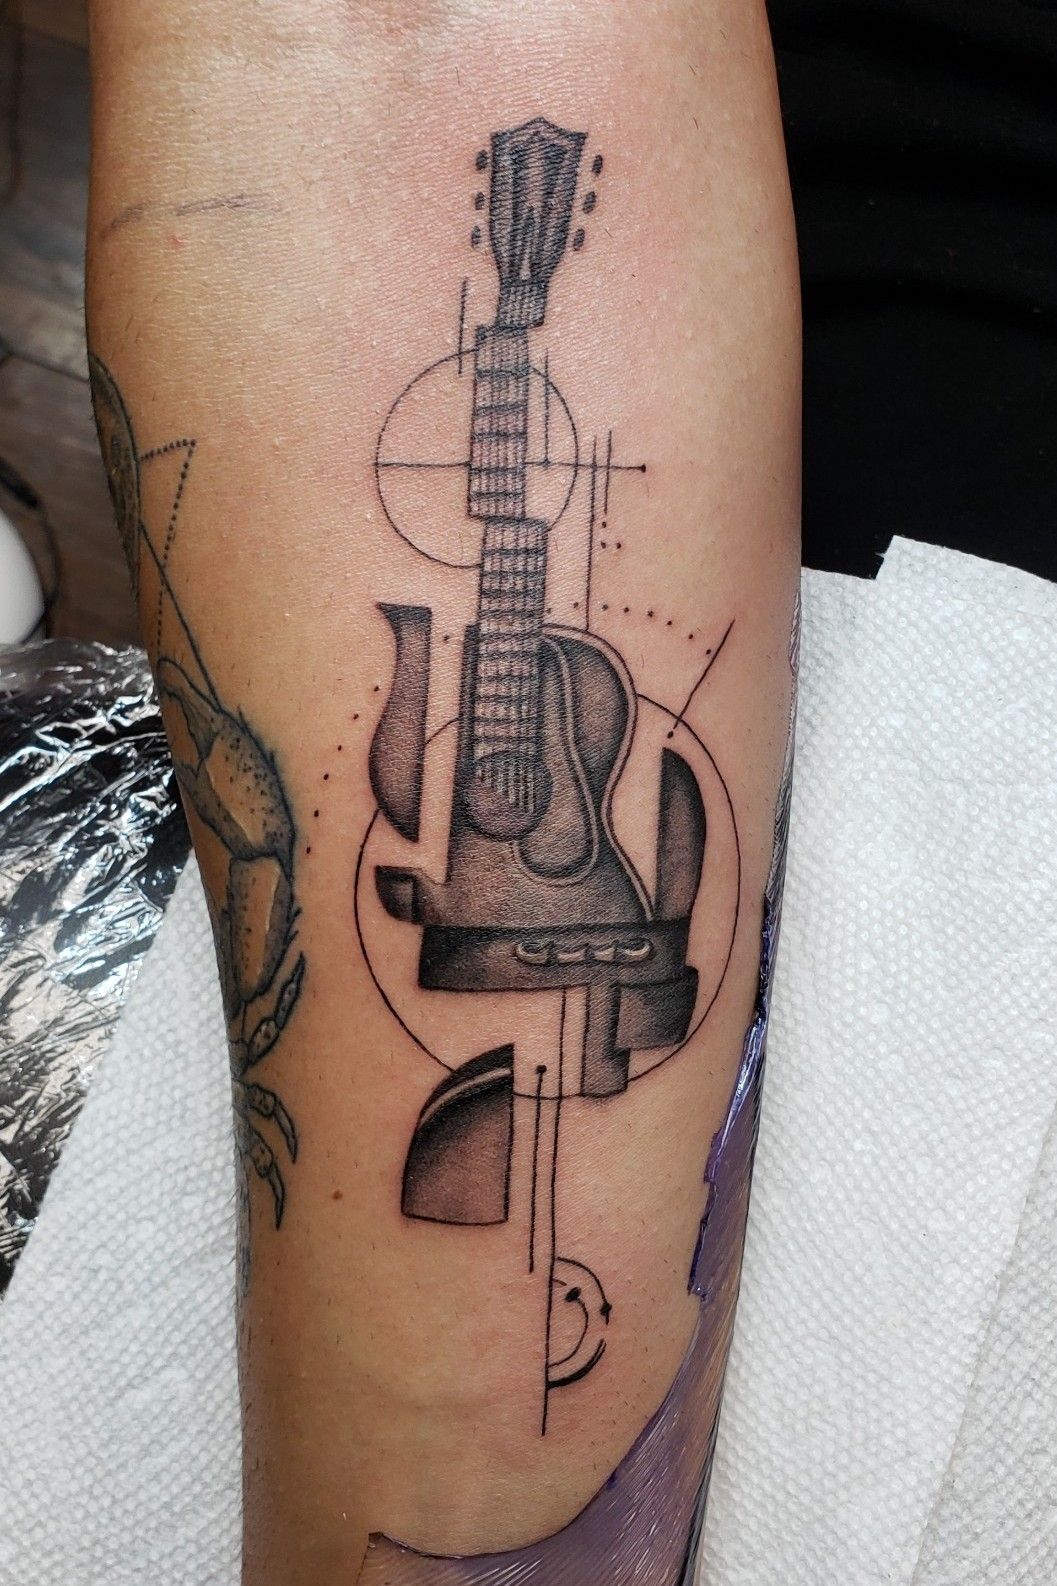 Guitar Temporary Tattoo for Music Lovers Gift-music Tattoo Design-acoustic Guitar  Tattoo Ideas-unique Musical Tattoo-meaningful Tattoo Gift - Etsy